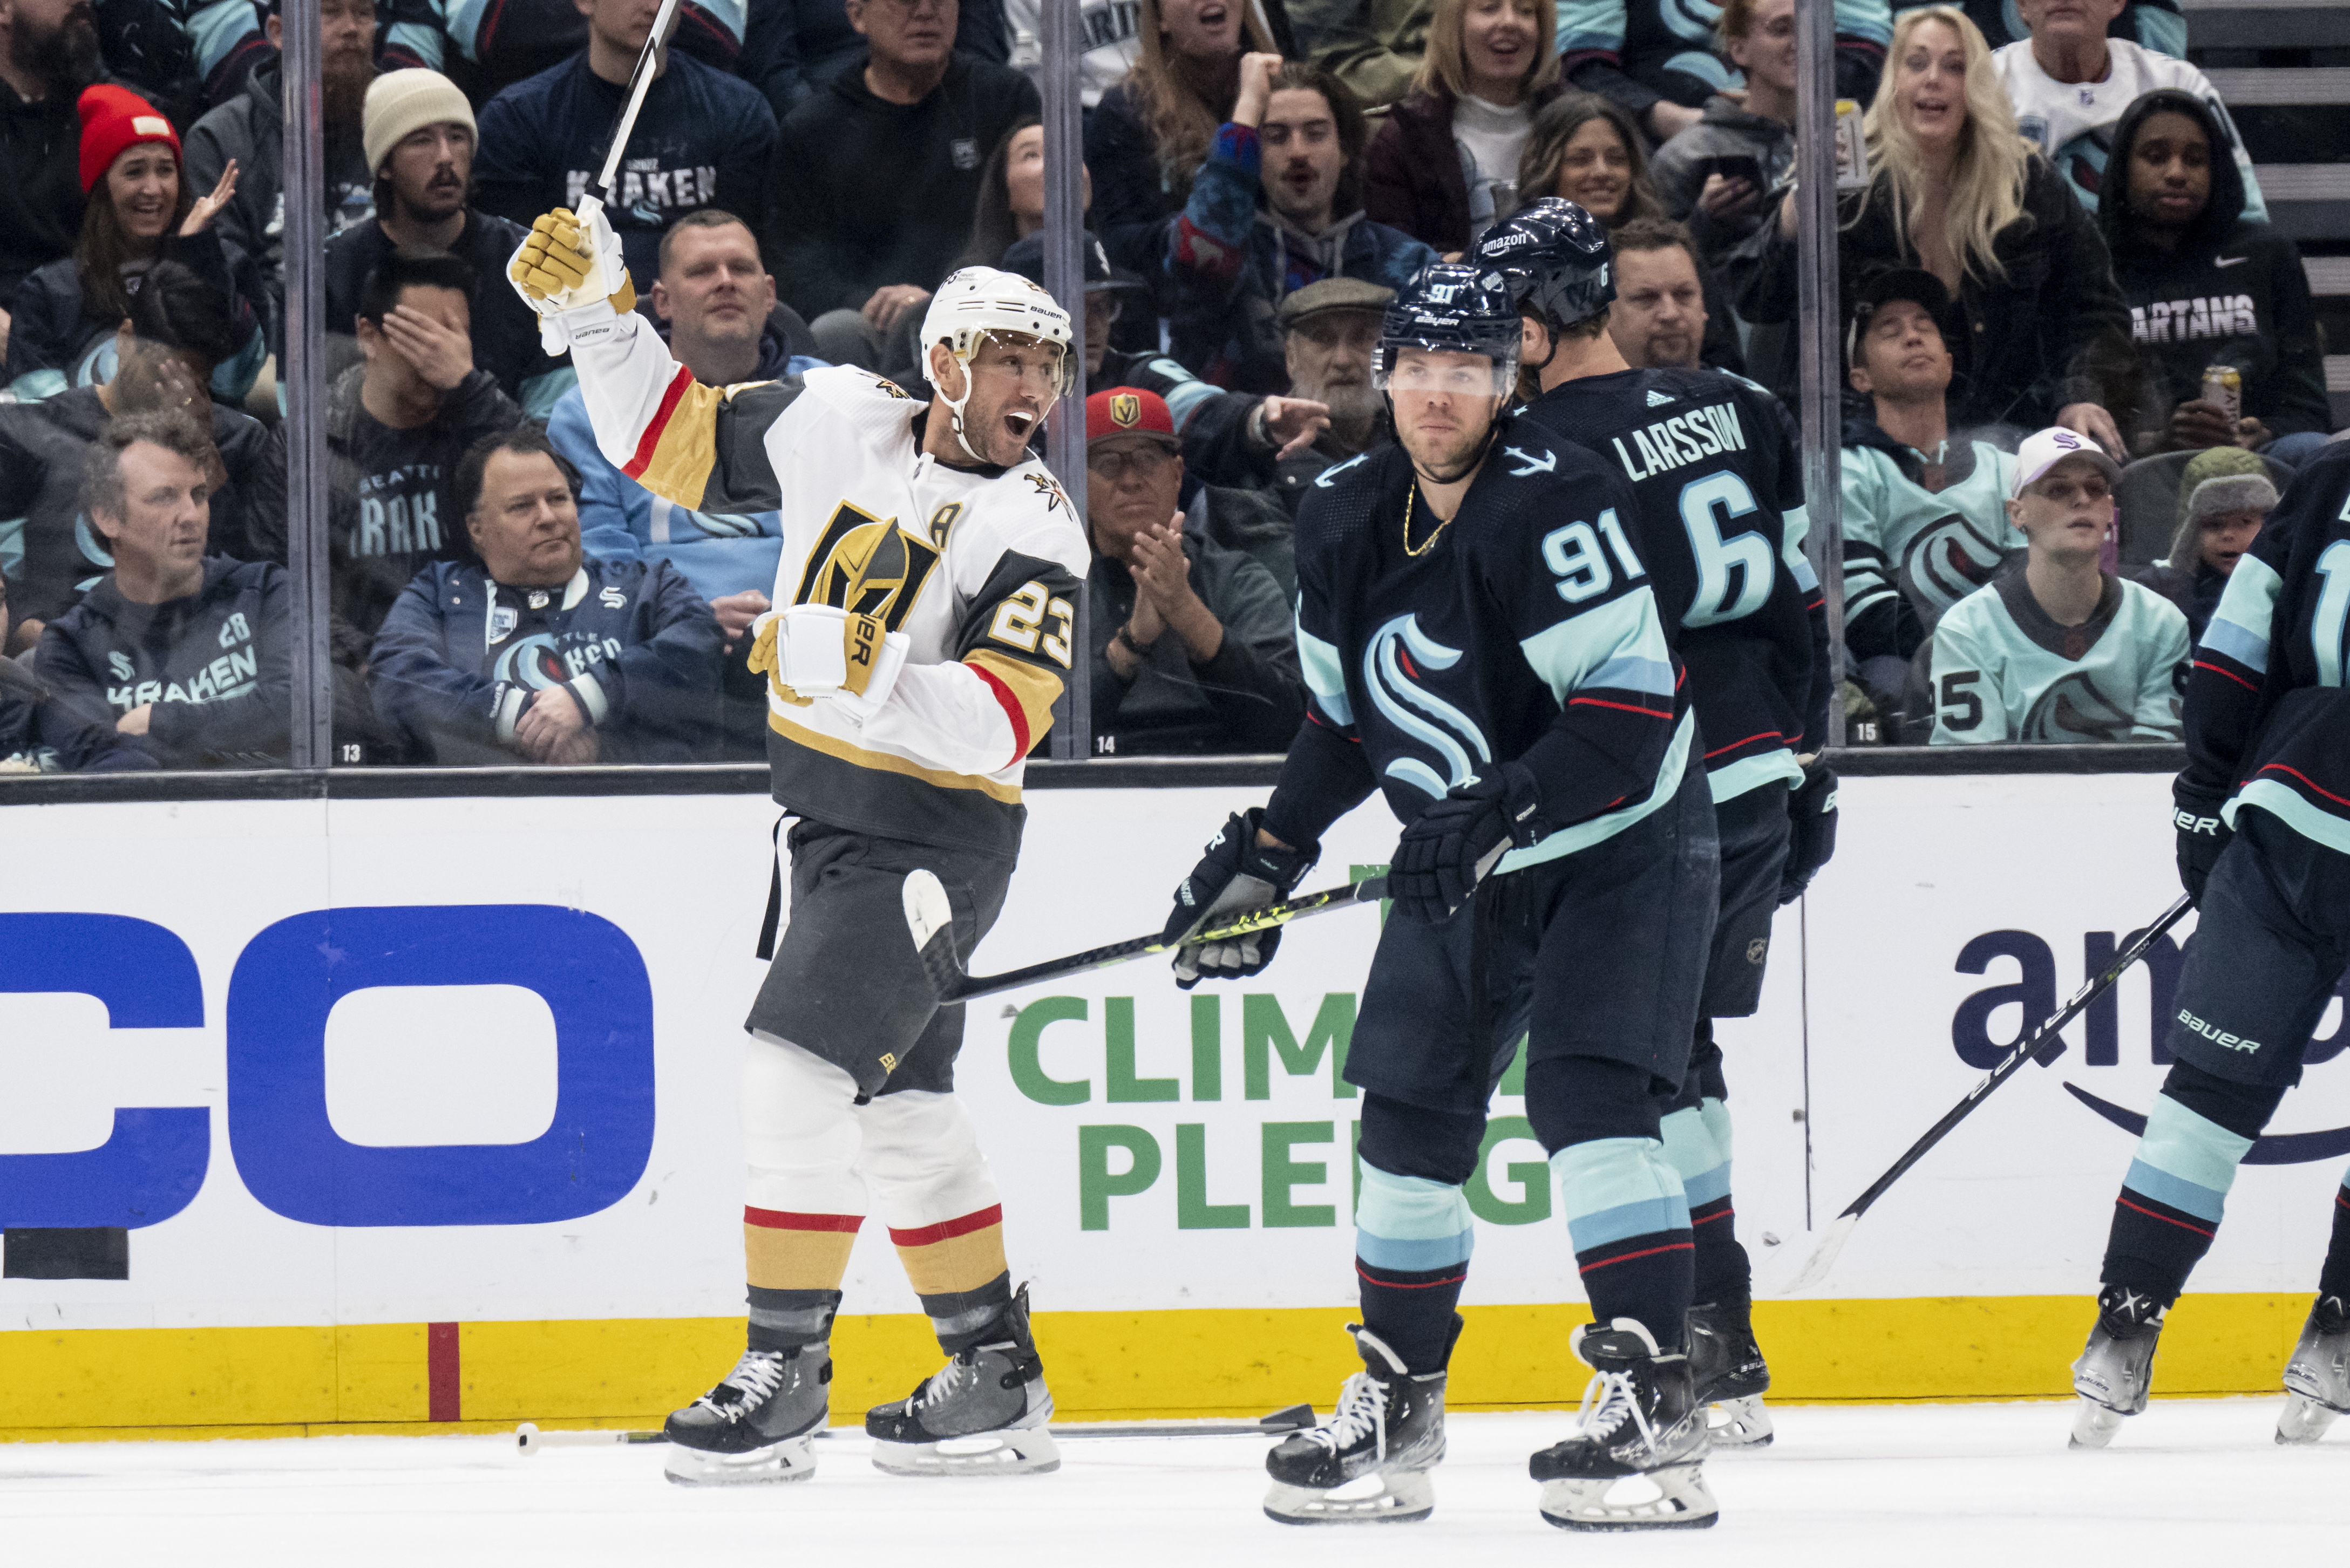 NHL Rumors: Vegas Golden Knights Defenseman Could Be Moved - NHL